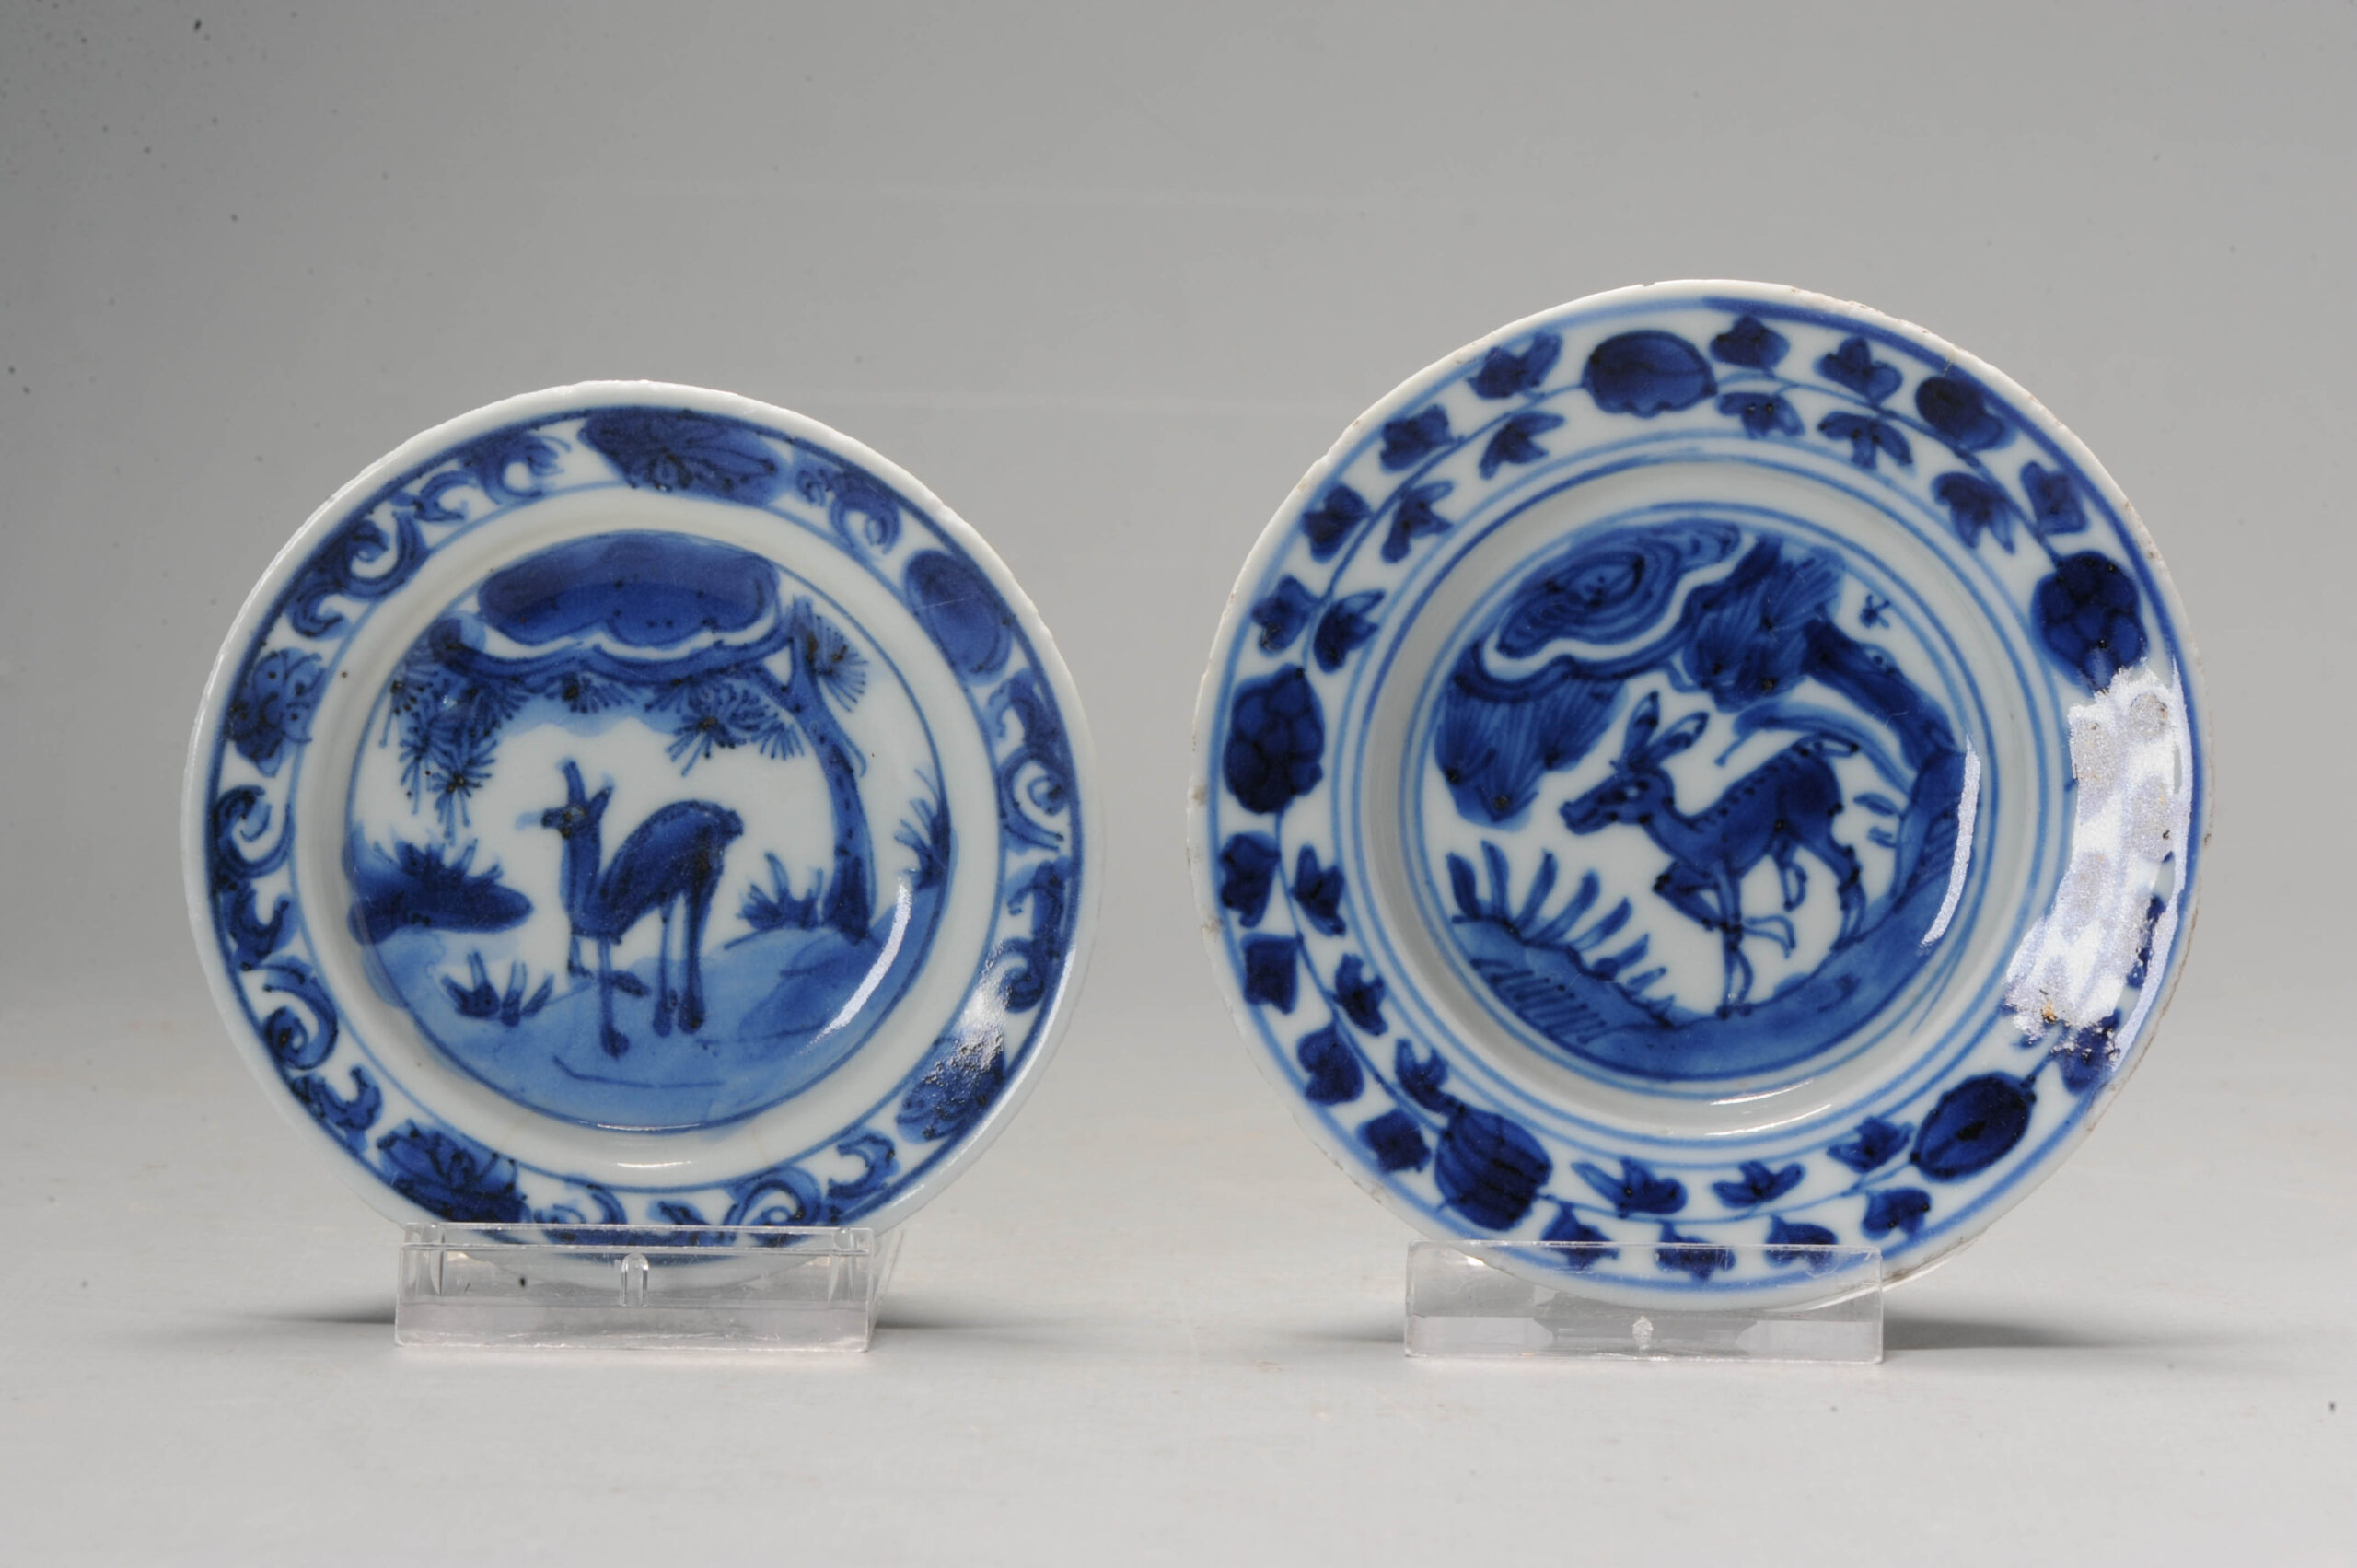 1139 & 1140 A Pair Chinese porcelain Ming Blue and White Snuff DIshes ca 1600